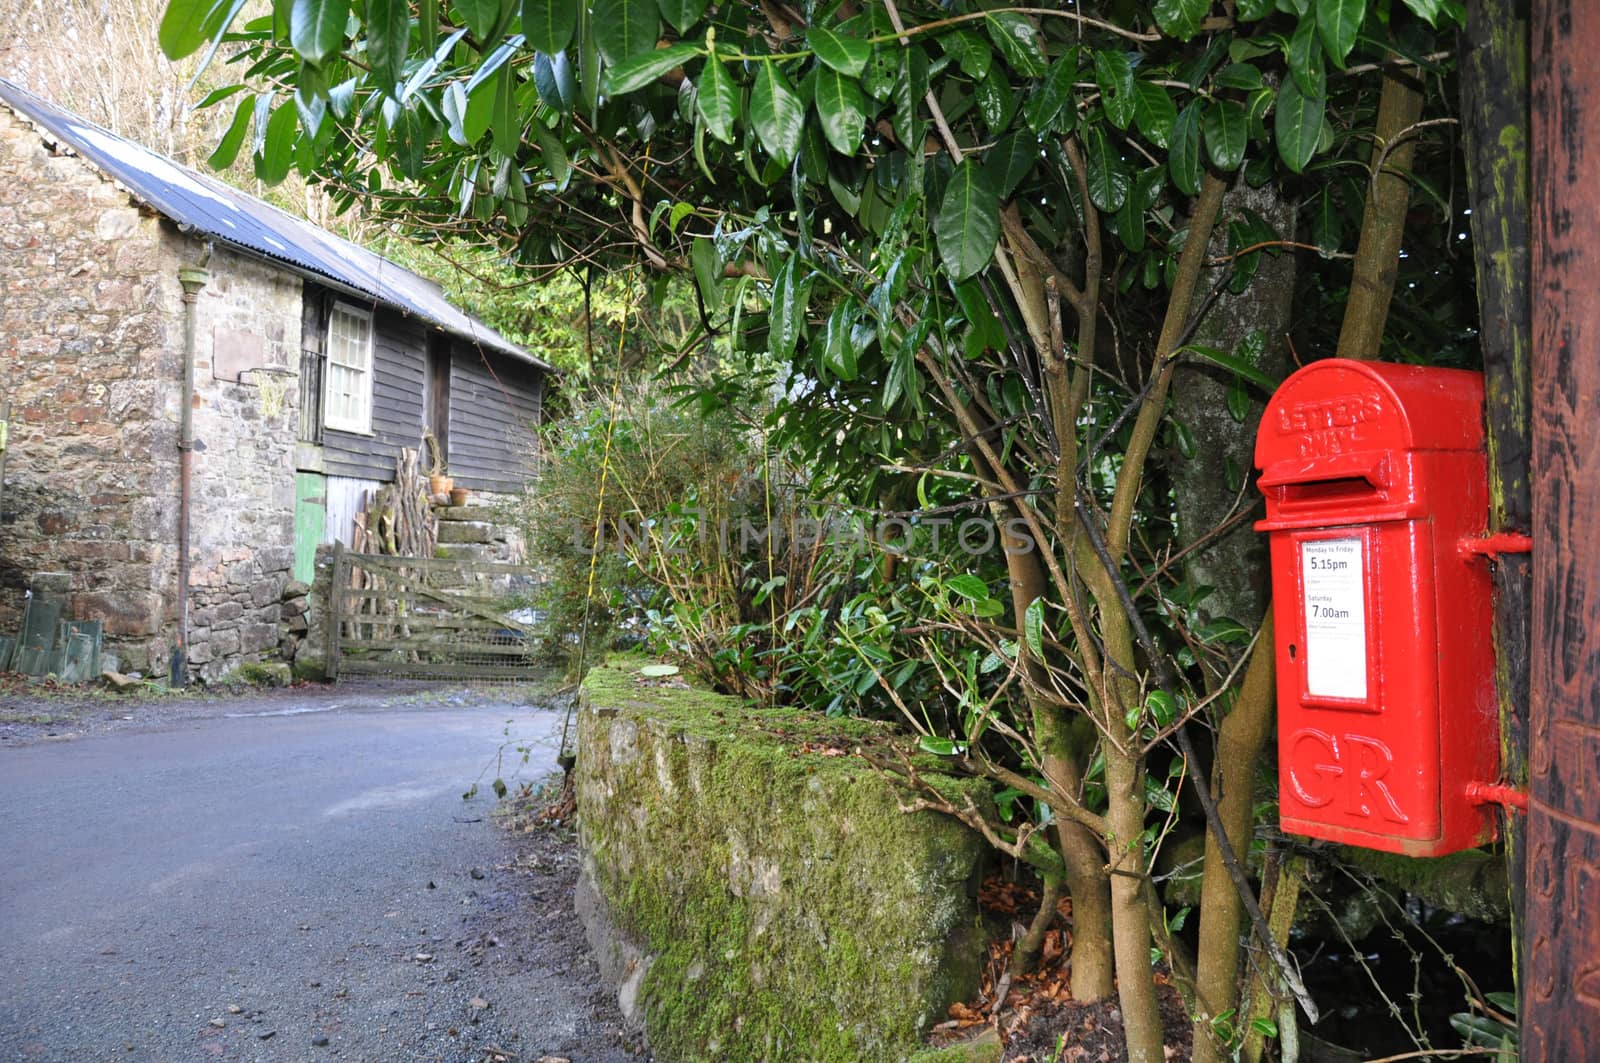 An English village post box. Taken in the village  of Belstone, on the northern edge of Dartmoor in Devon - A standard Royal Mail design used throughout the UK. 